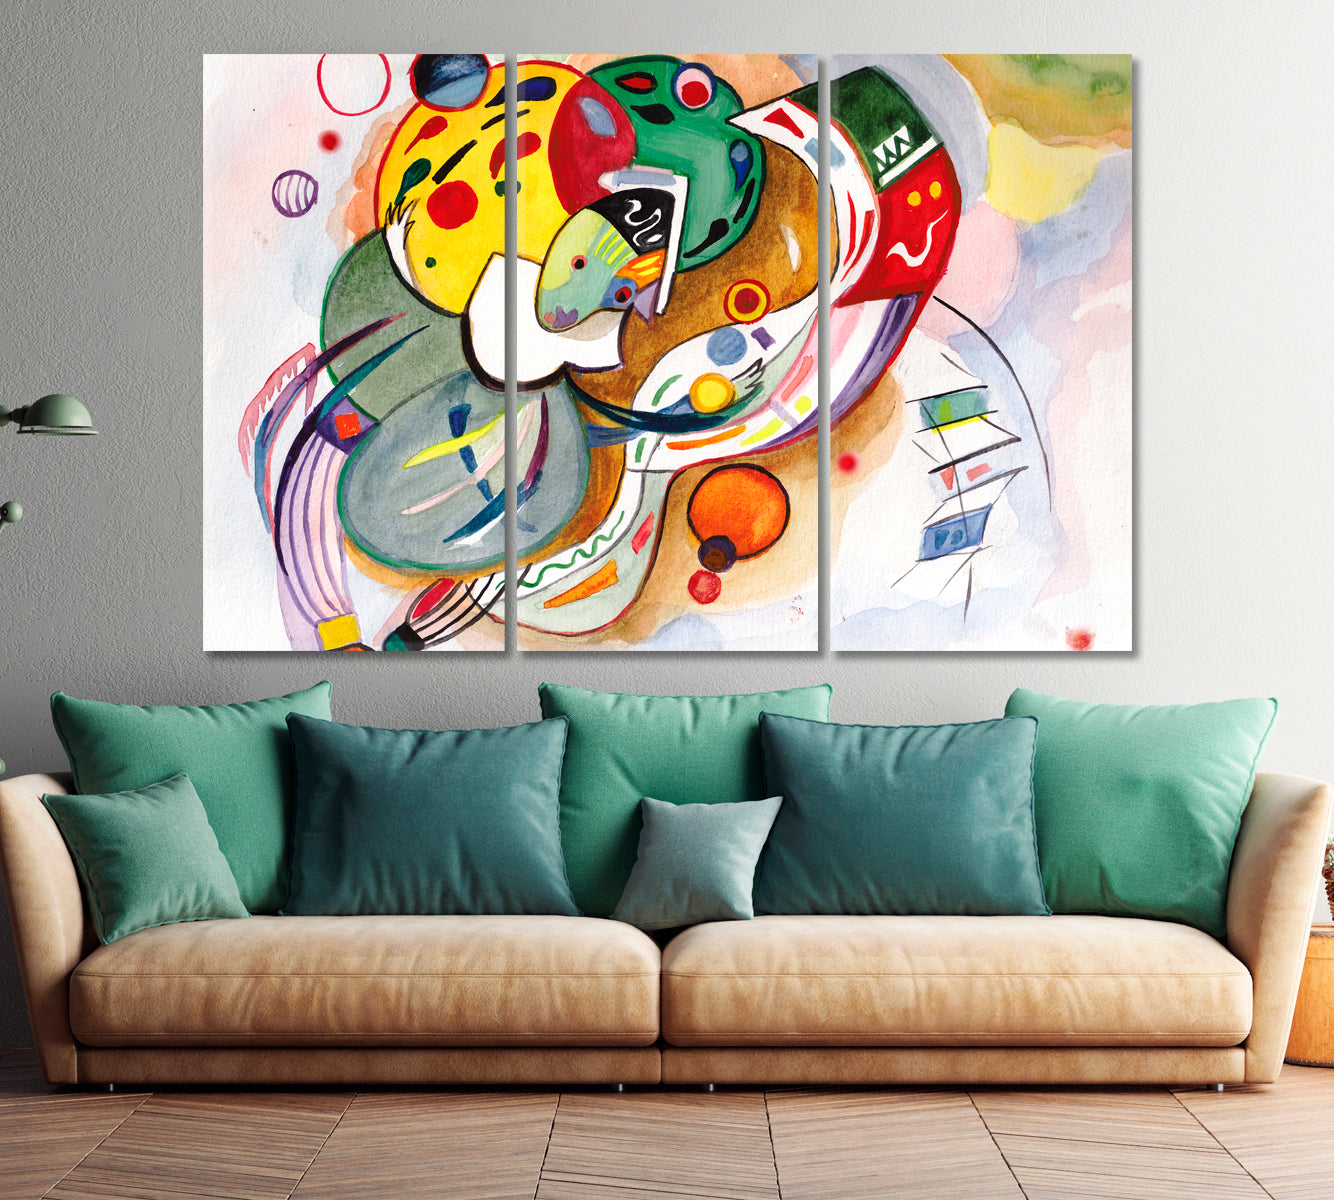 CLOWN Inspired By Kandinsky Trendy Abstract Figurative Contemporary Art Artesty 3 panels 36" x 24" 